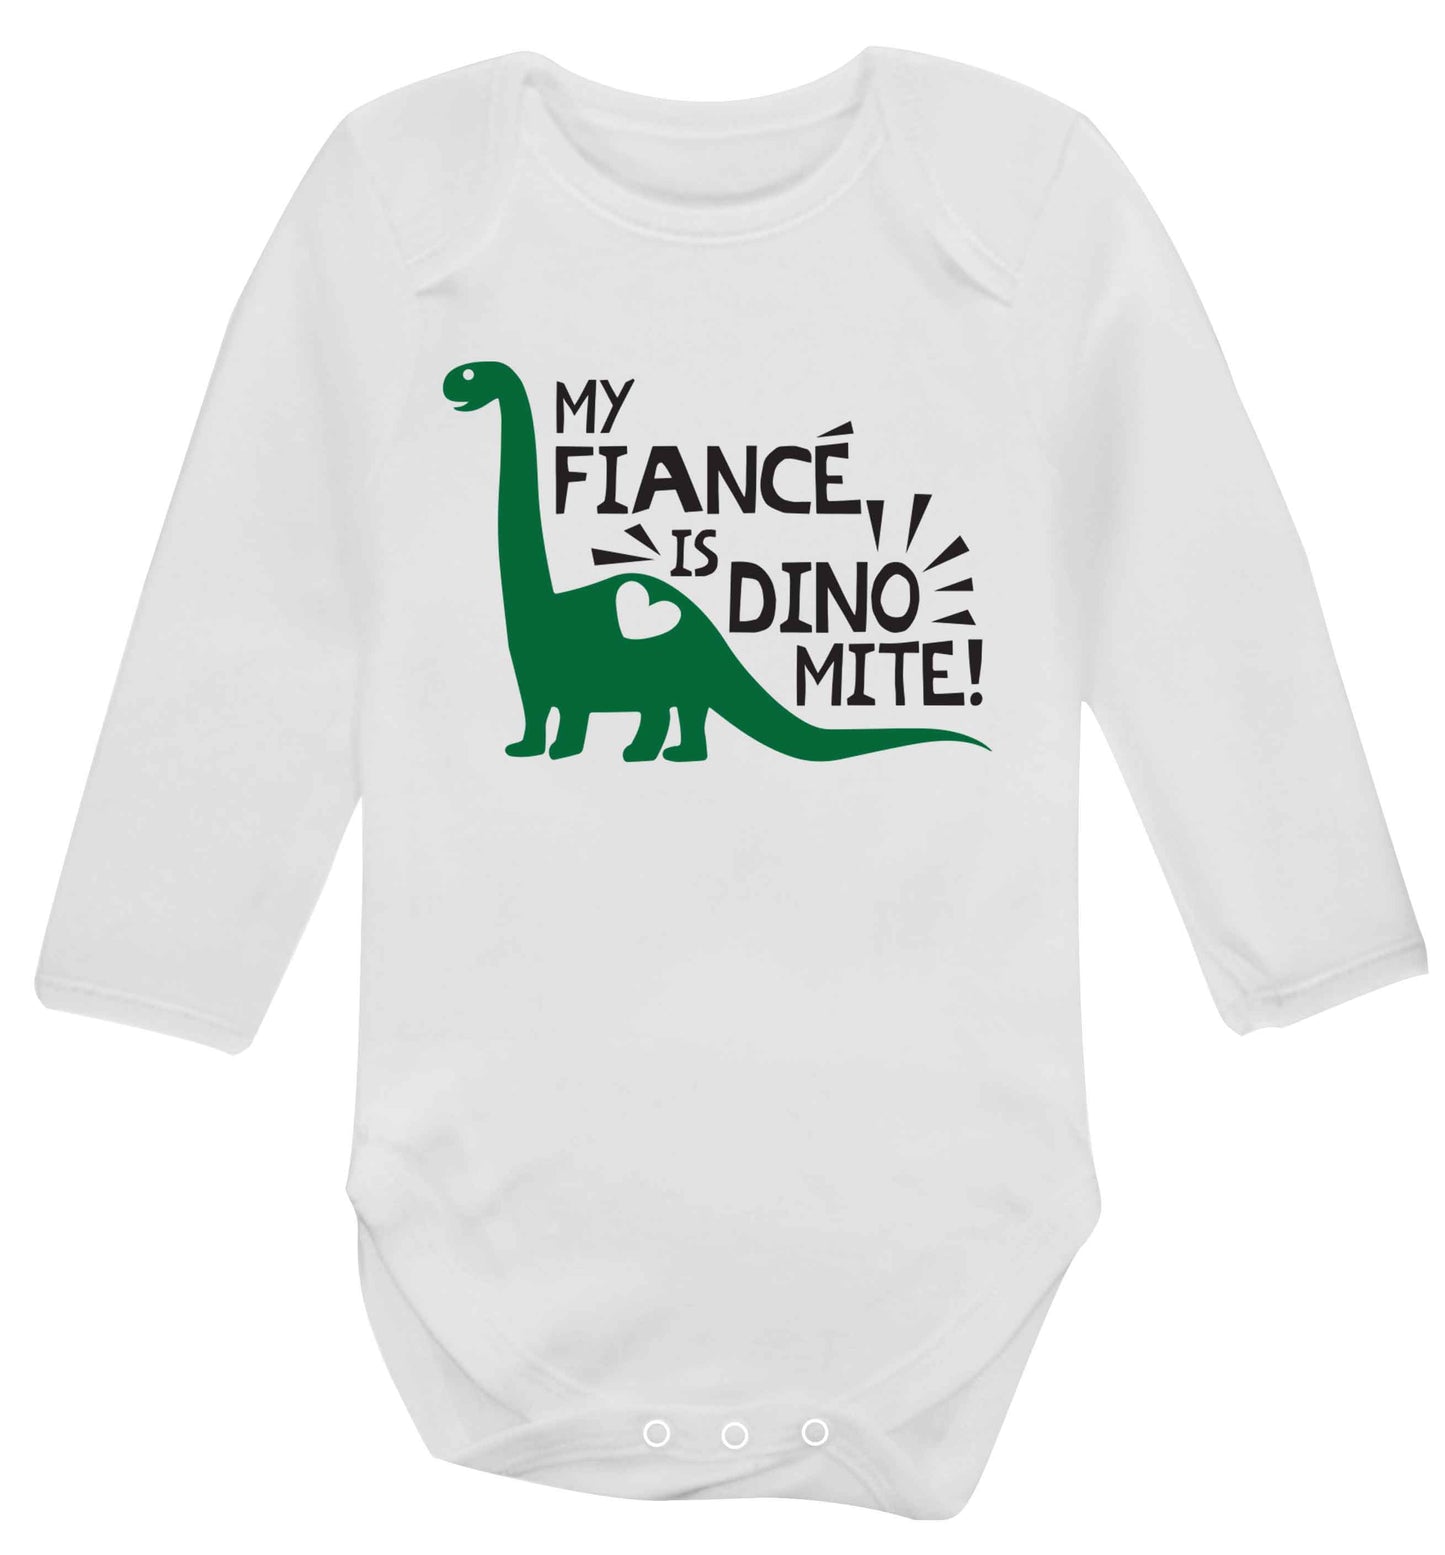 My fiance is dinomite! Baby Vest long sleeved white 6-12 months